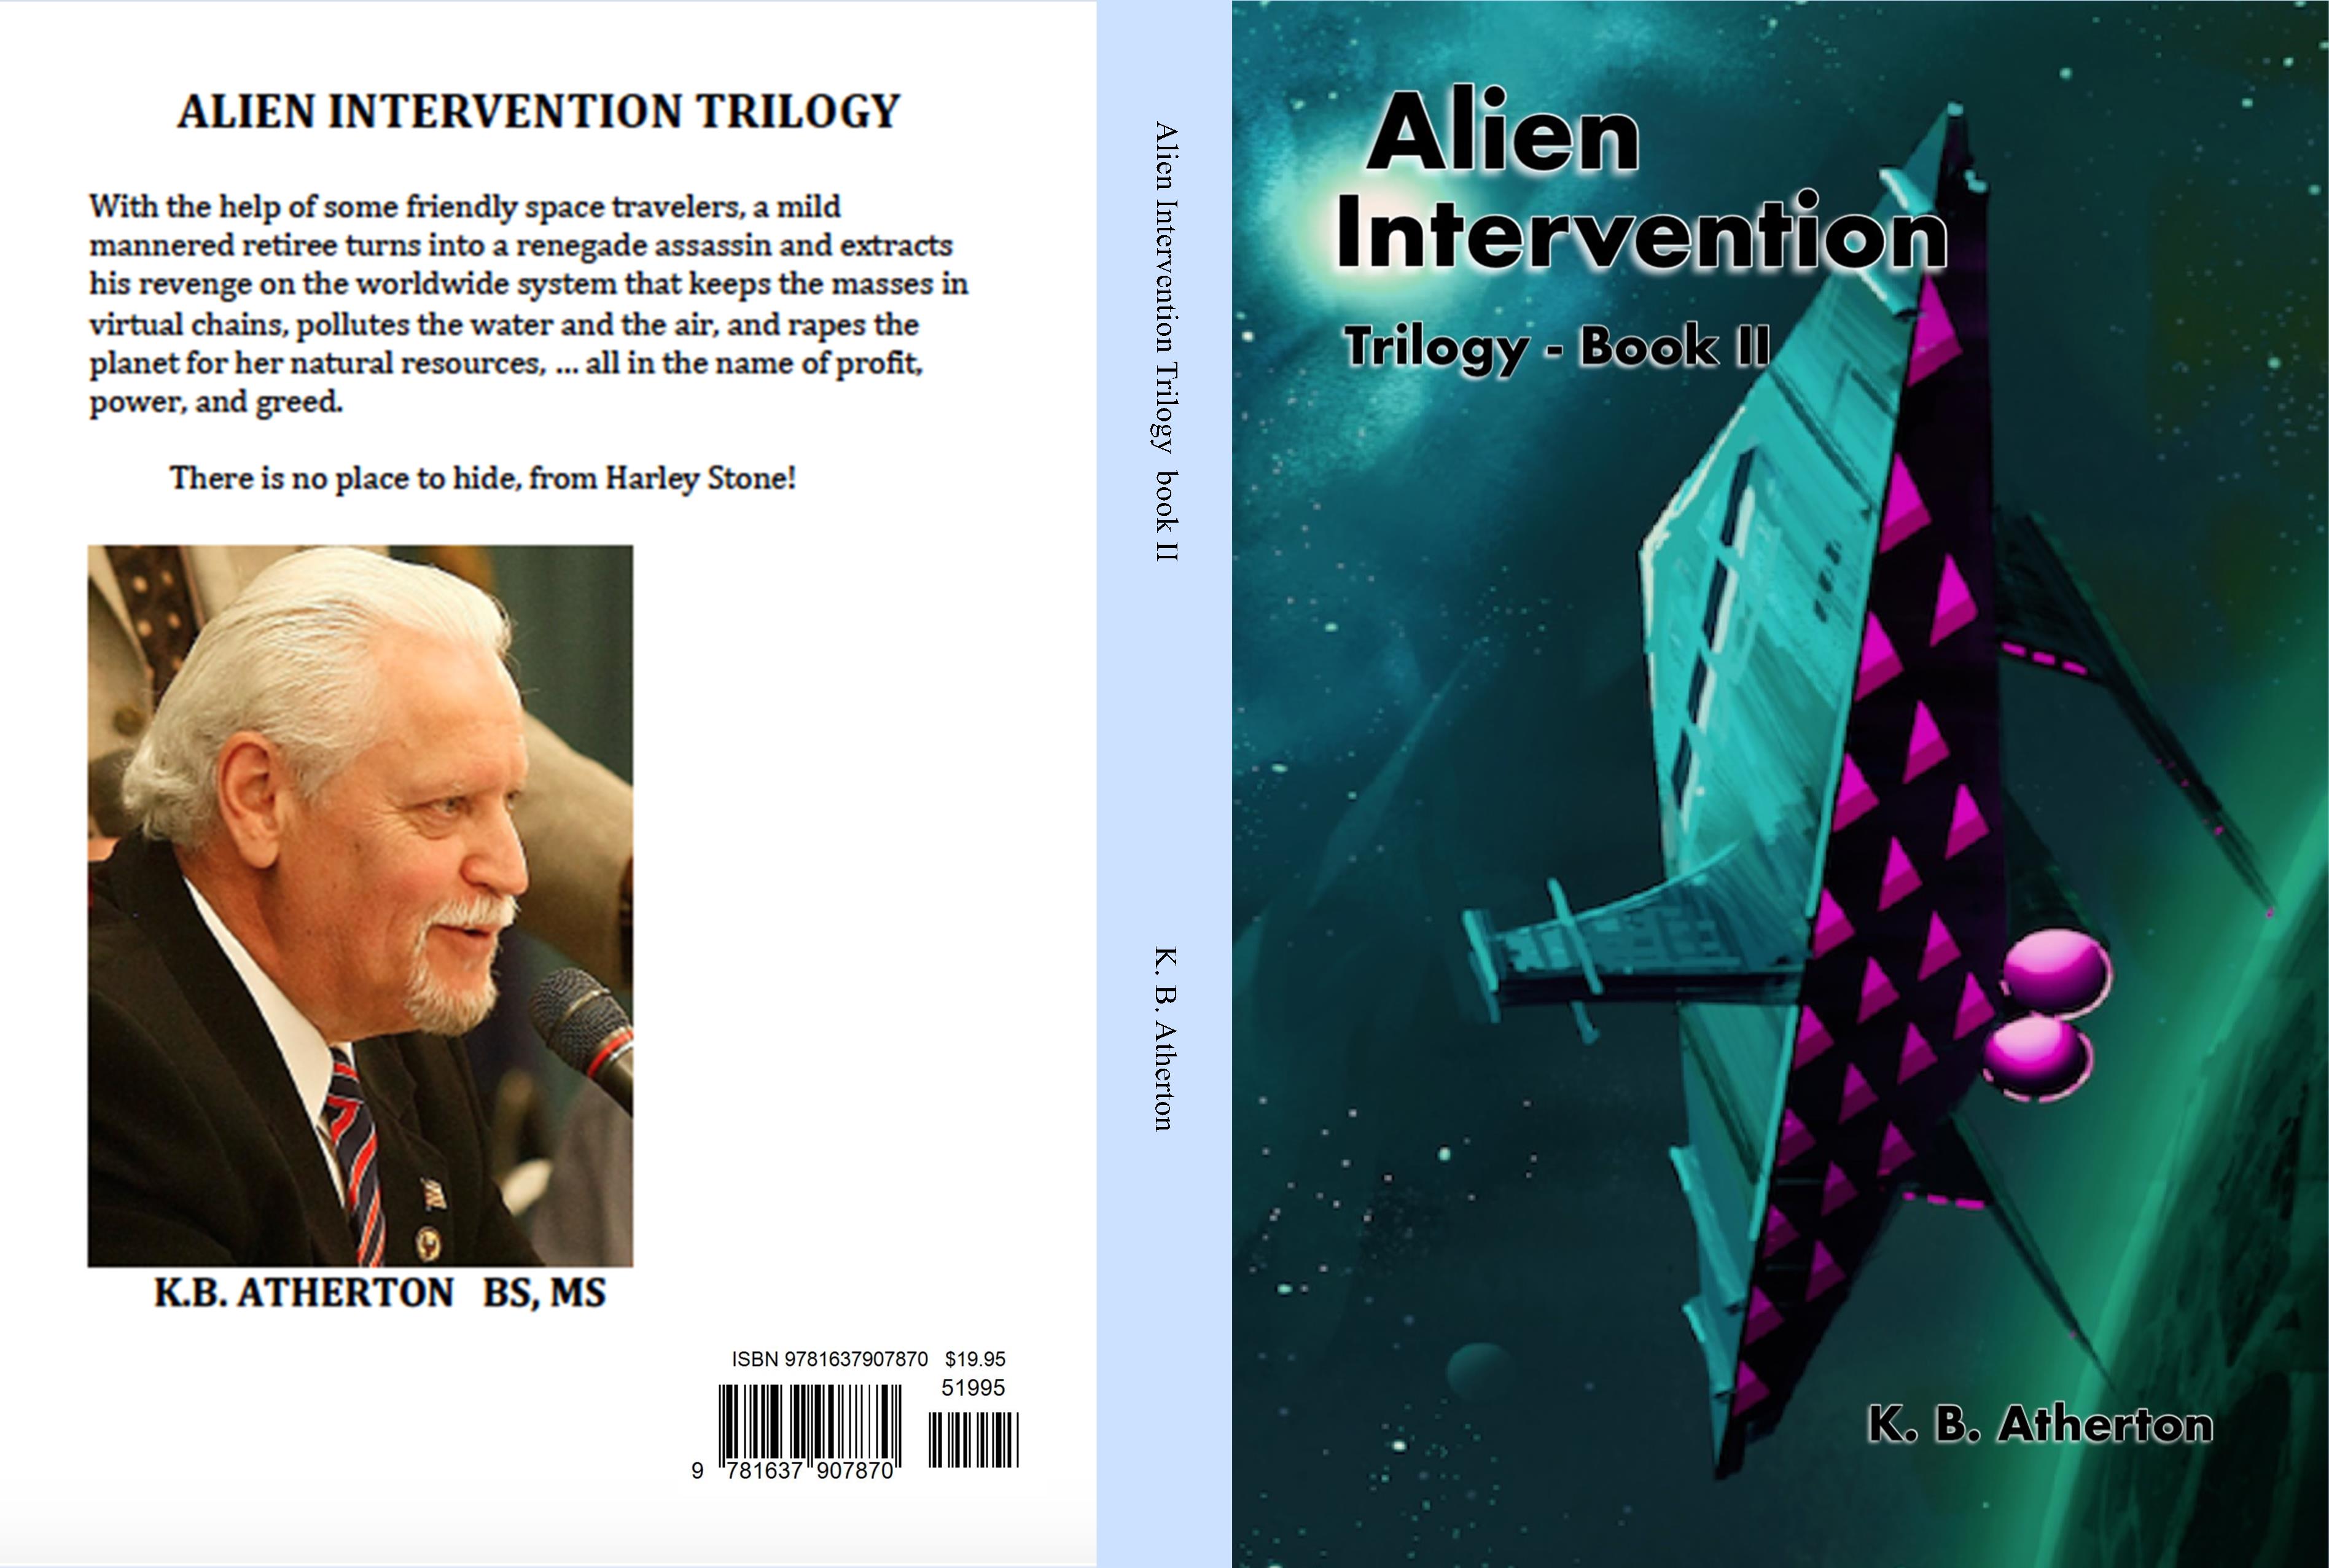 Alien Intervention Trilogy  book II cover image